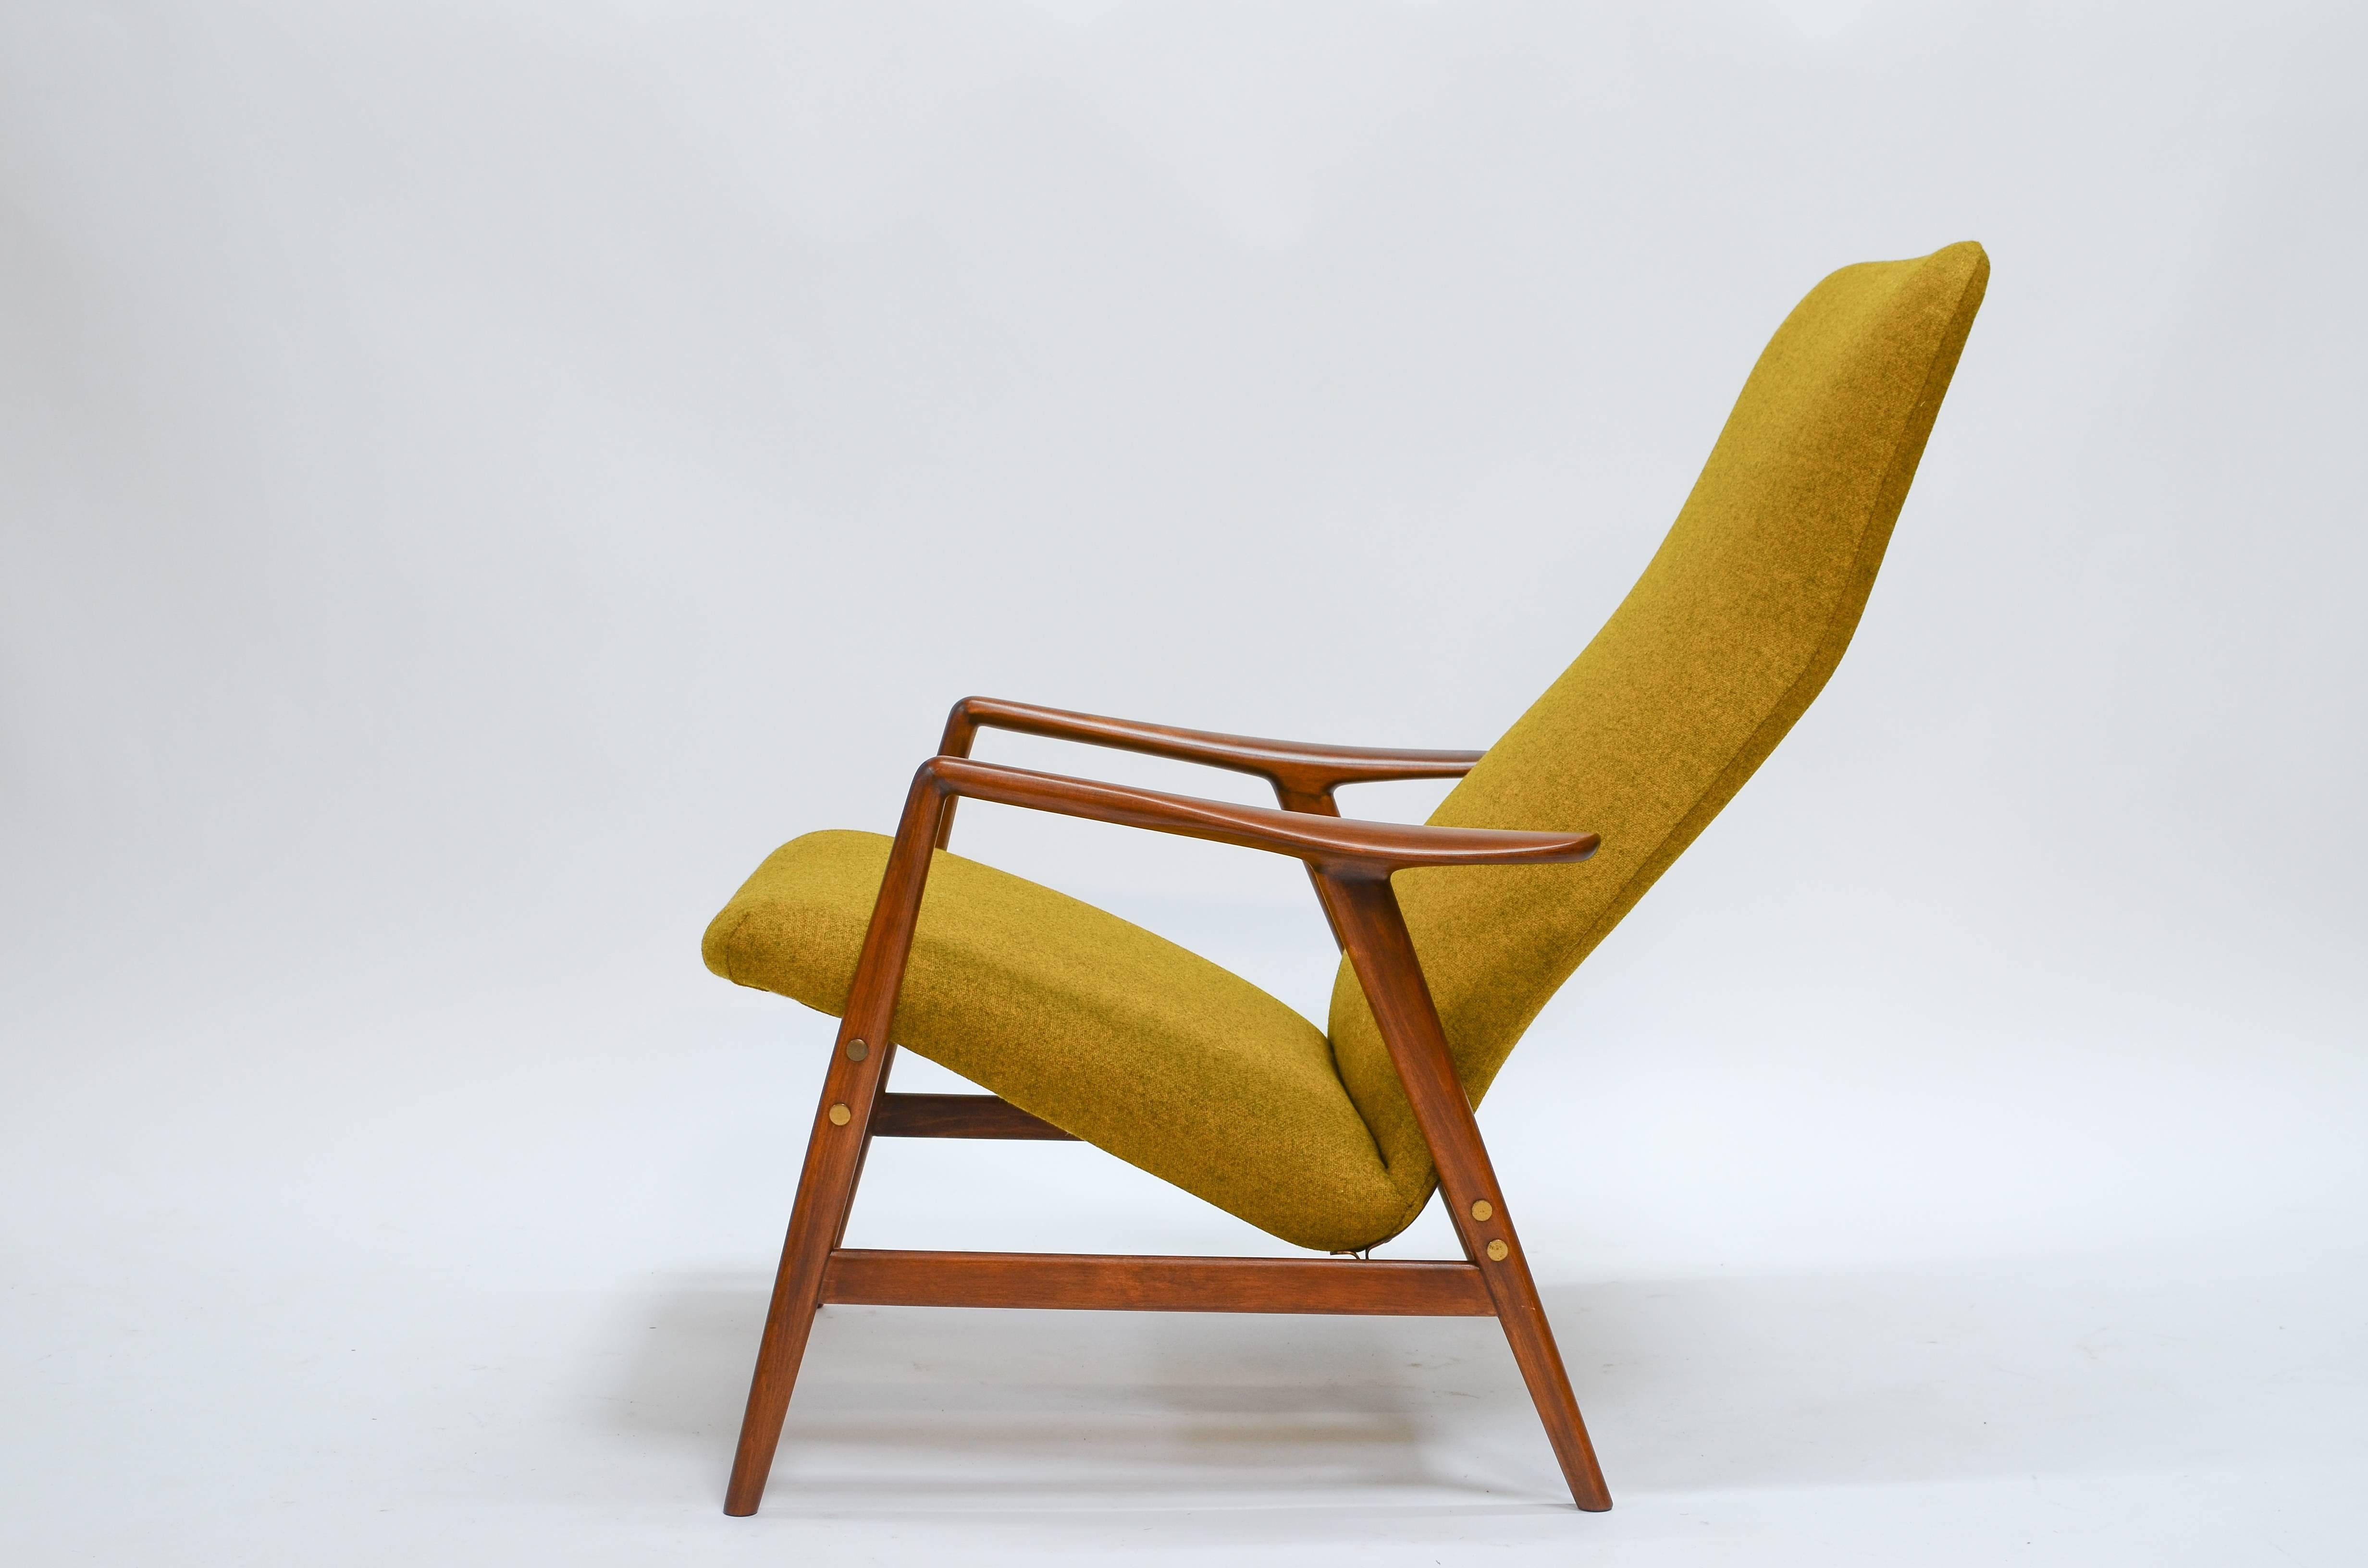 Danish modern highback reclining lounge chair designed by Alf Svensson for Fritz Hansen in 1957. The frame features sculpted teak arms and spindle legs. The back of this chair can be reclined and locked into place for hours of comfortable sitting.